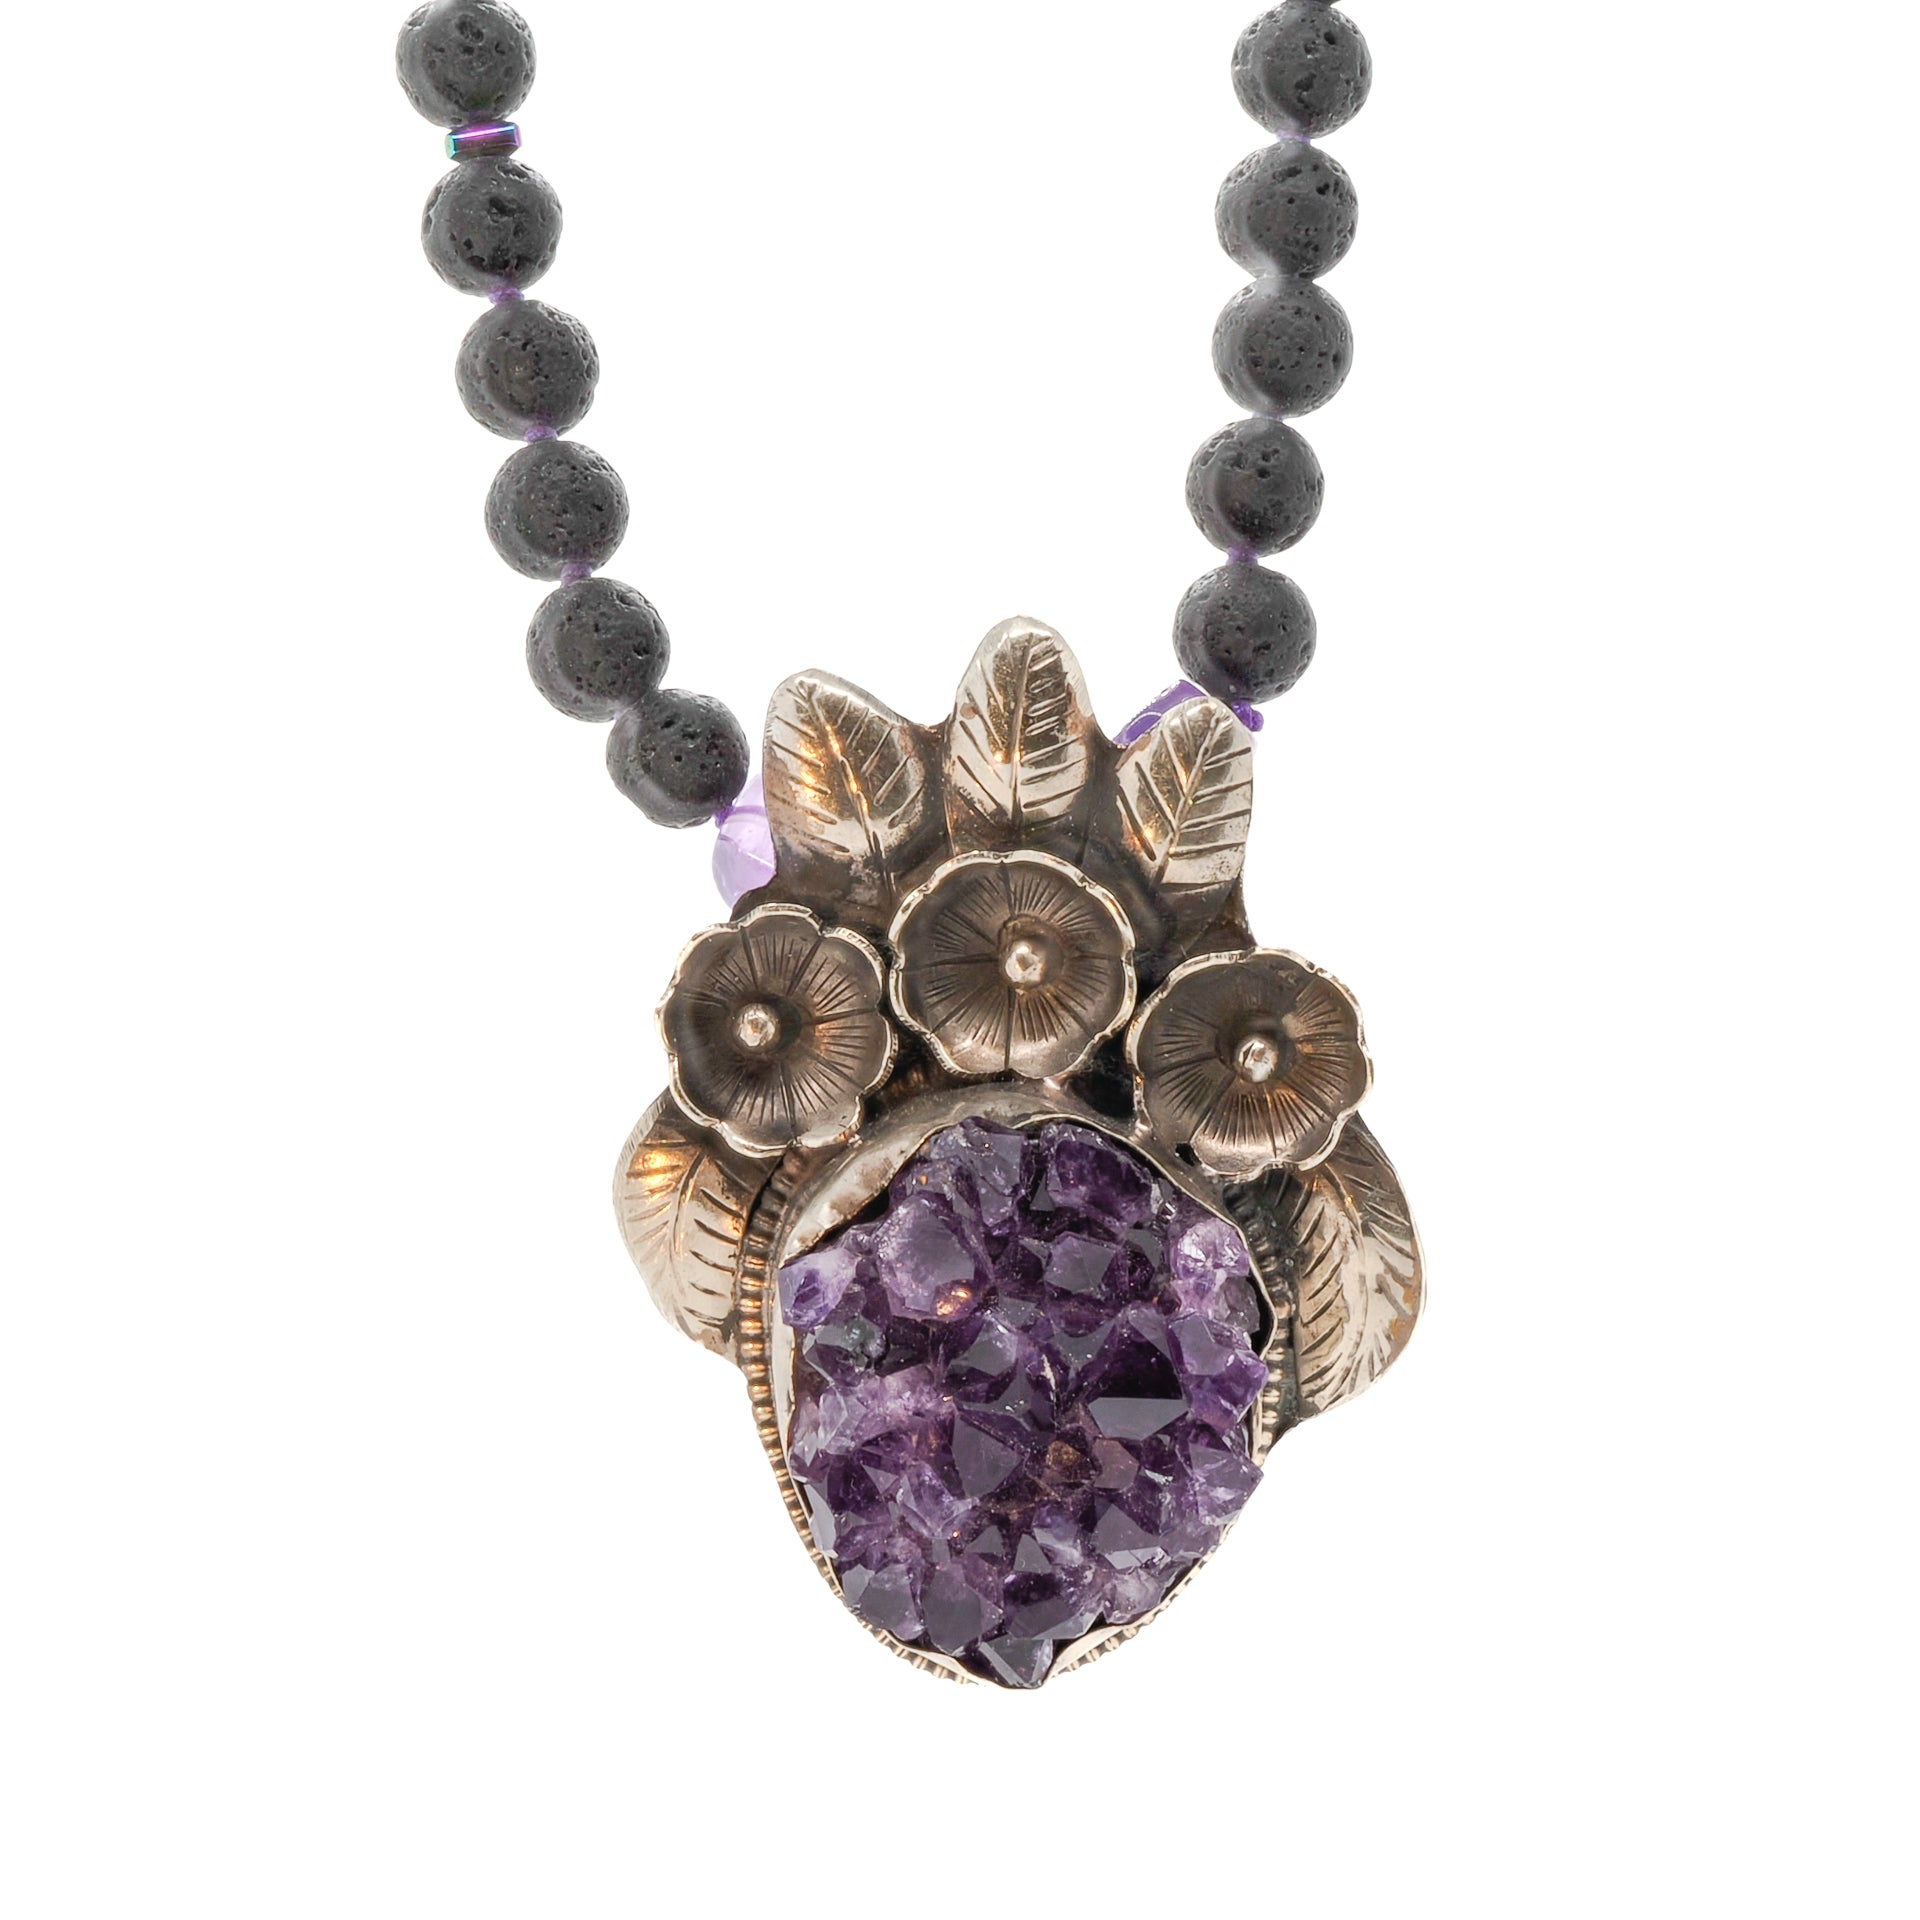 Elegant Spiritual Amethyst Necklace with a flower silver pendant and natural amethyst stone beads.